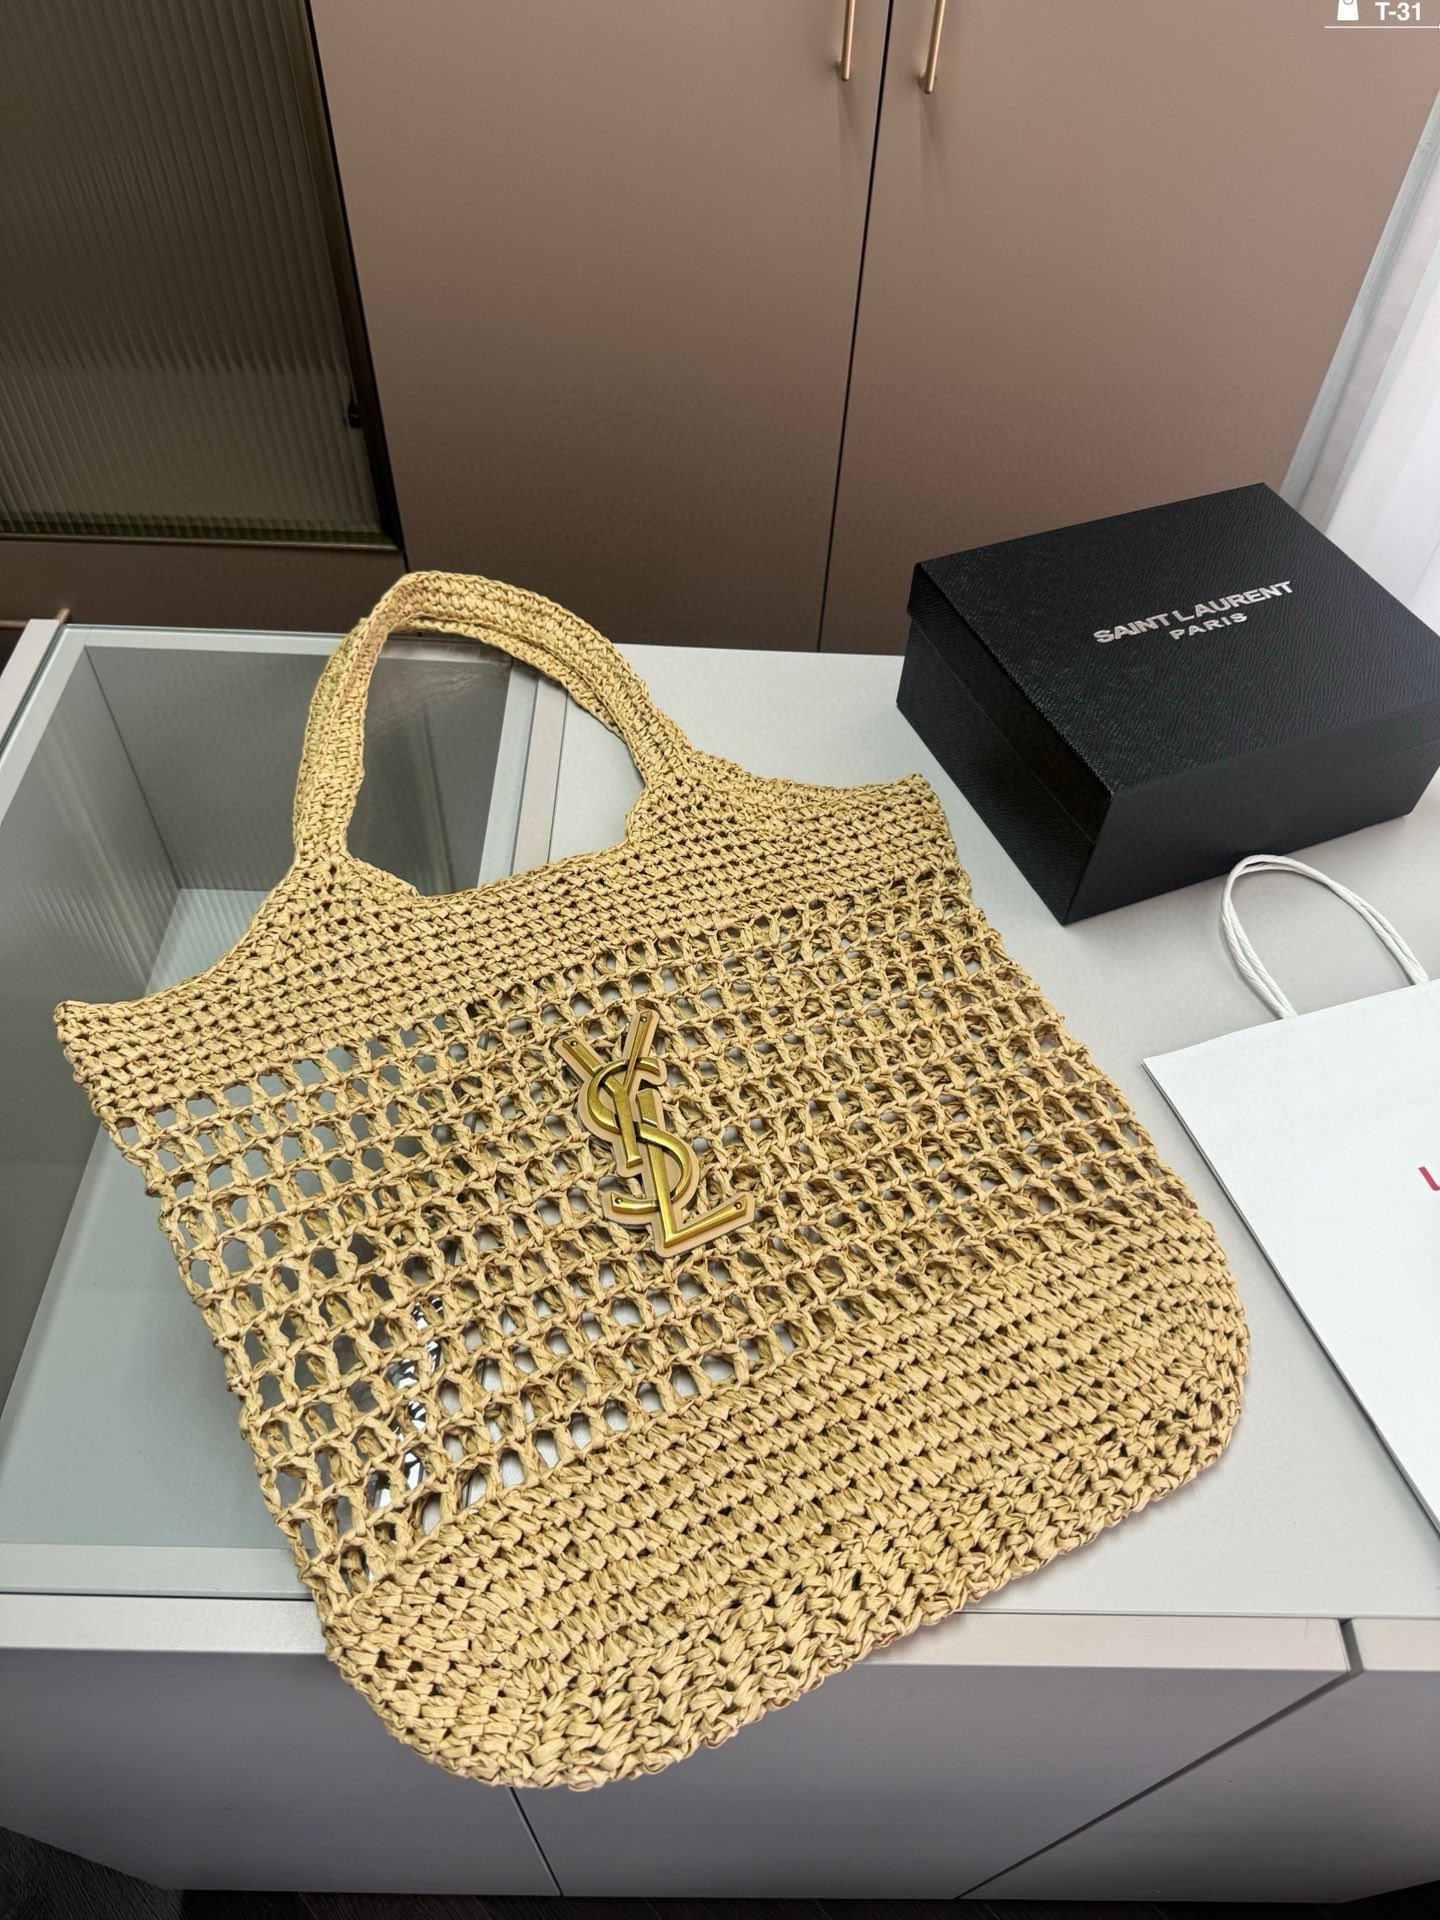 Yves Saint Laurent Tote Bags Raffia Straw Woven Summer Collection Fashion